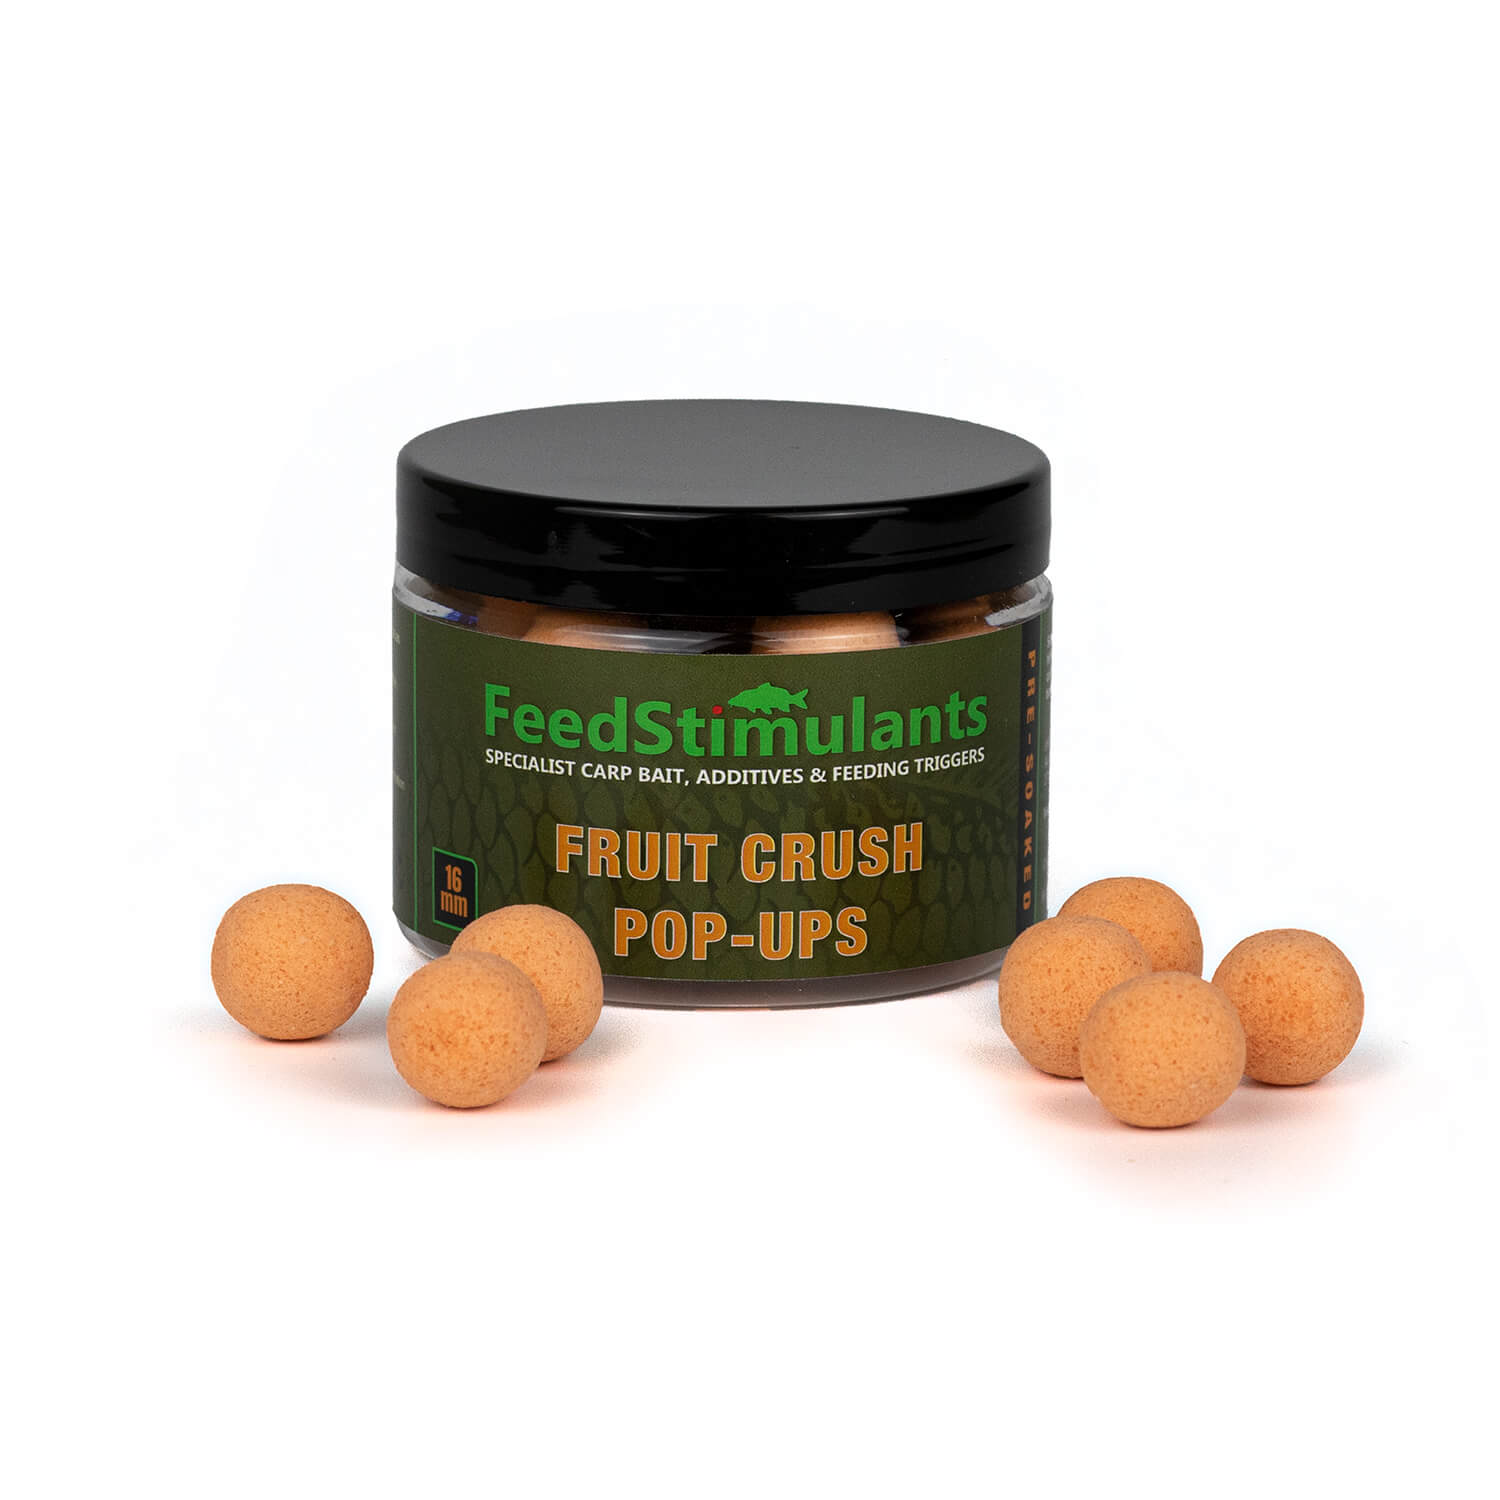 Pop ups boilies for carp - Visible & Attractive